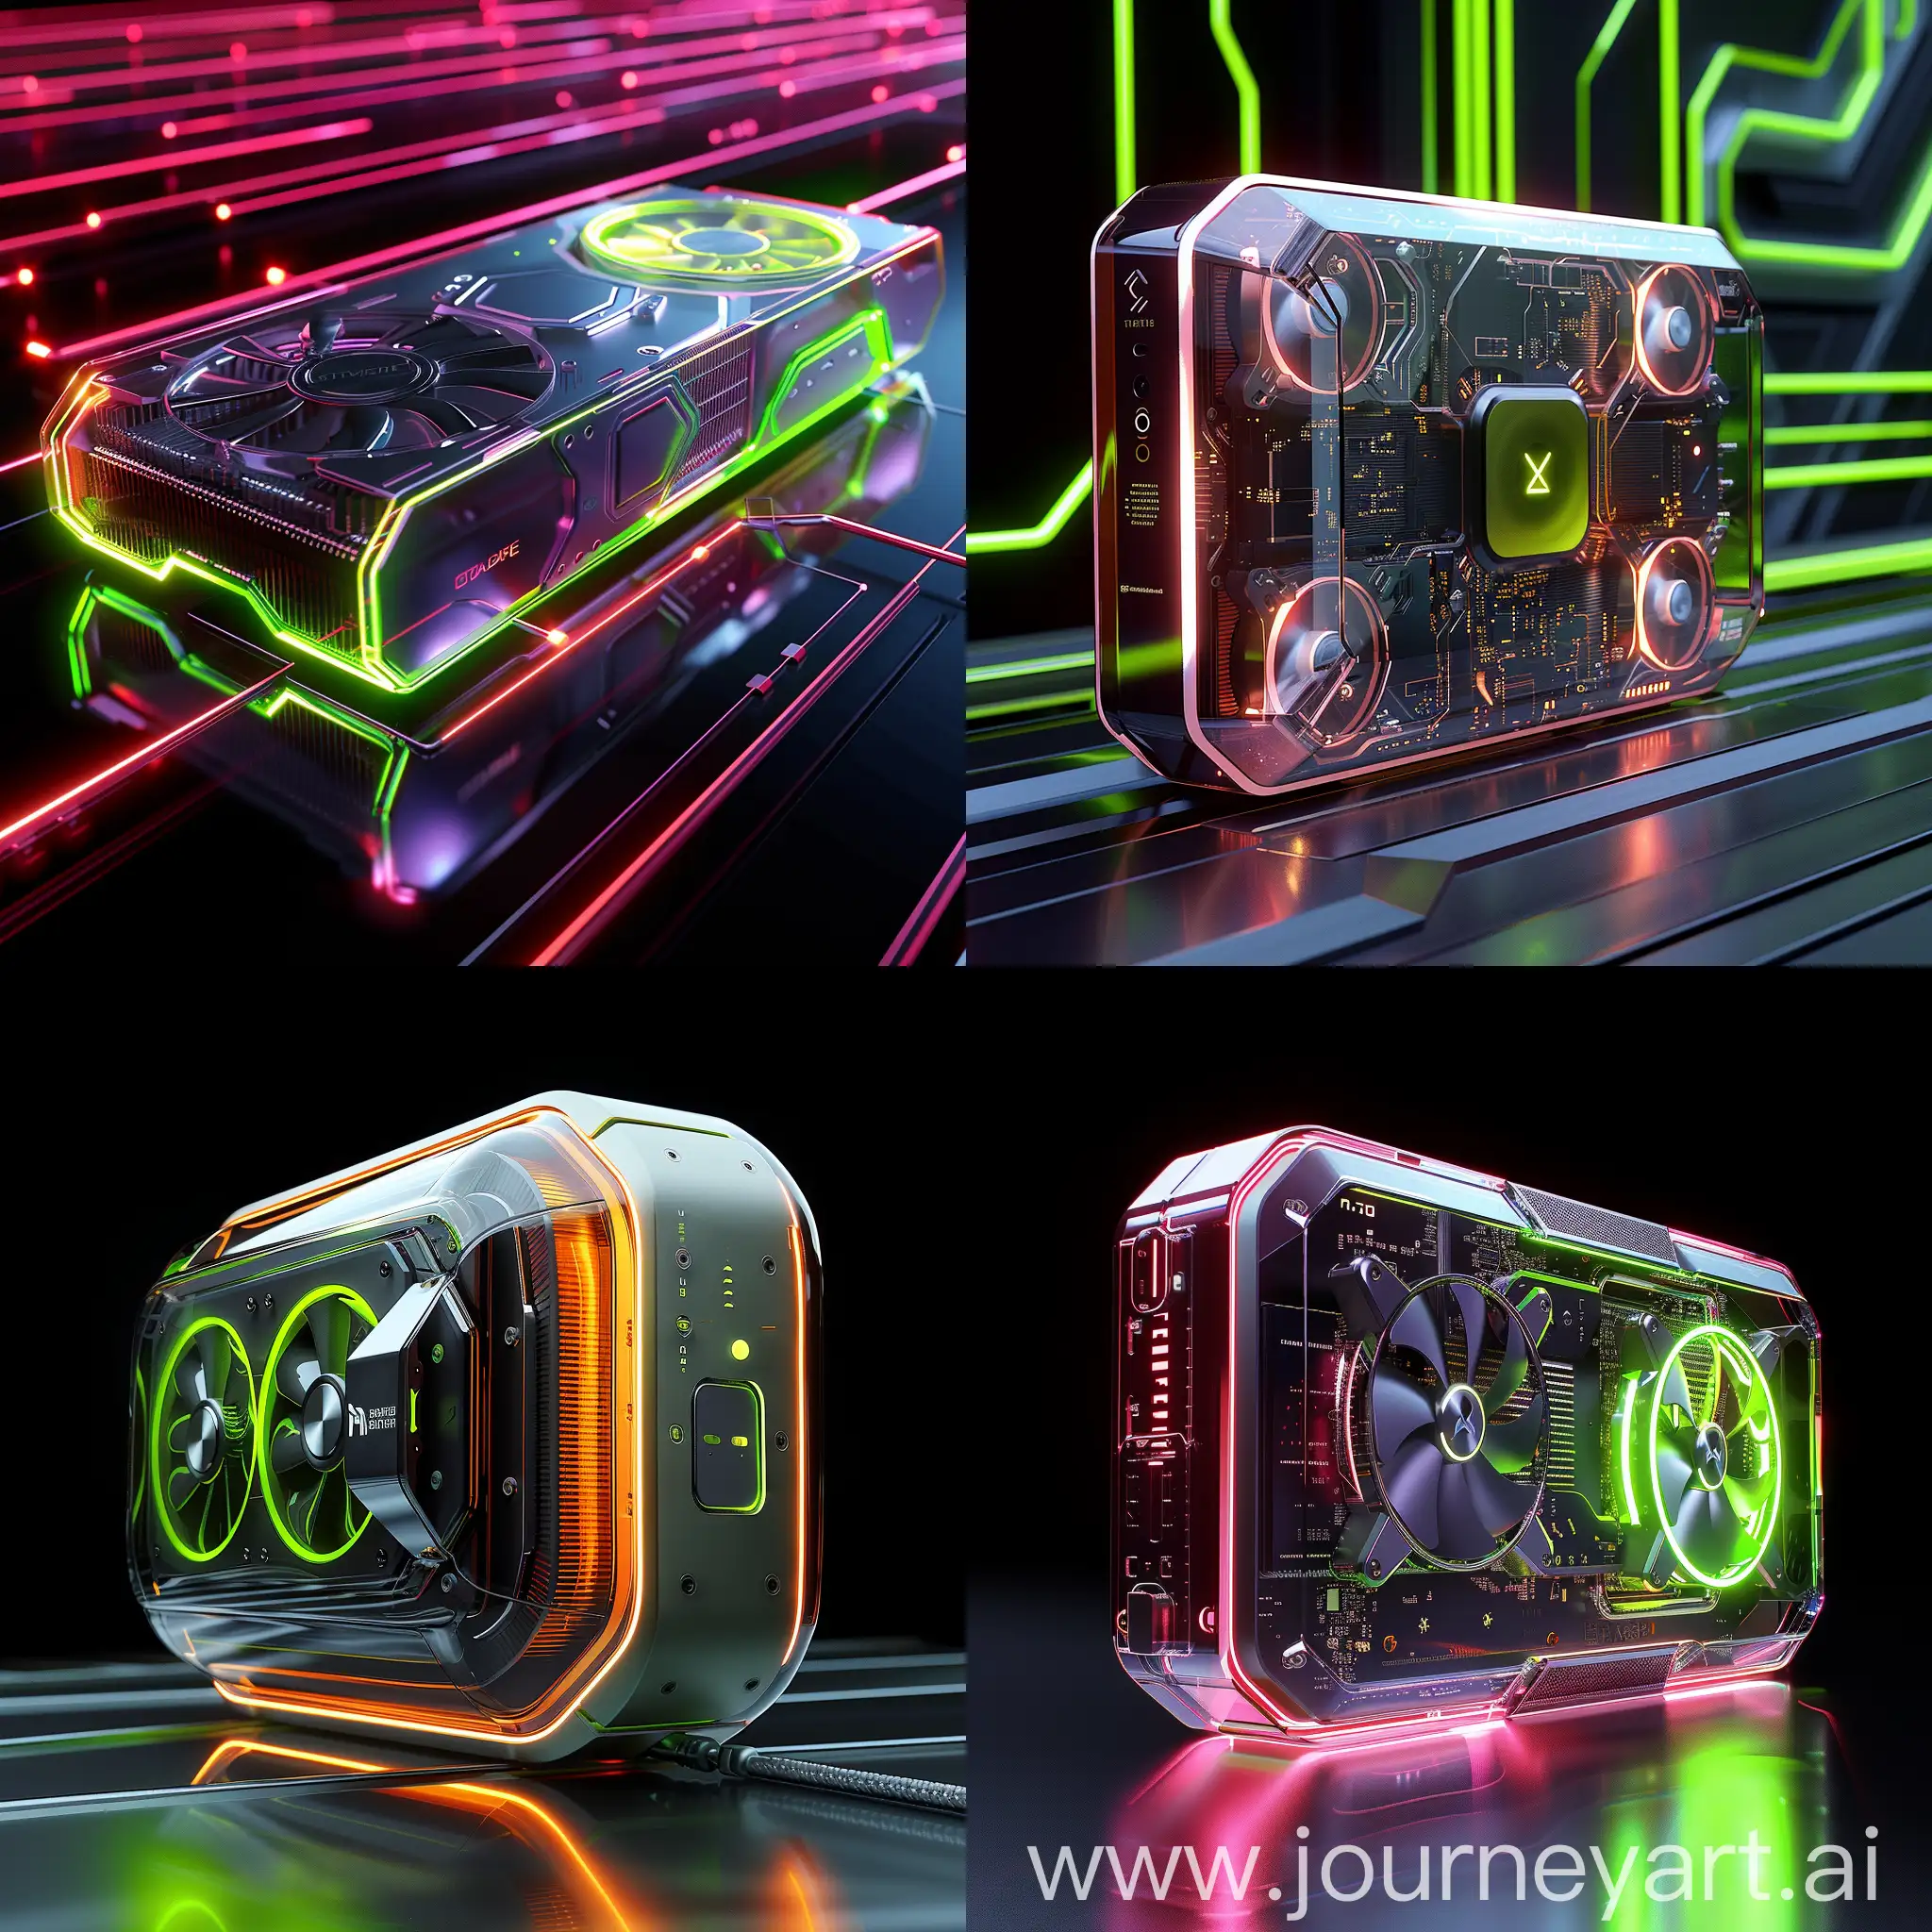 Futuristic-RTX-4090-with-EnergyEfficient-Design-and-Holographic-Display